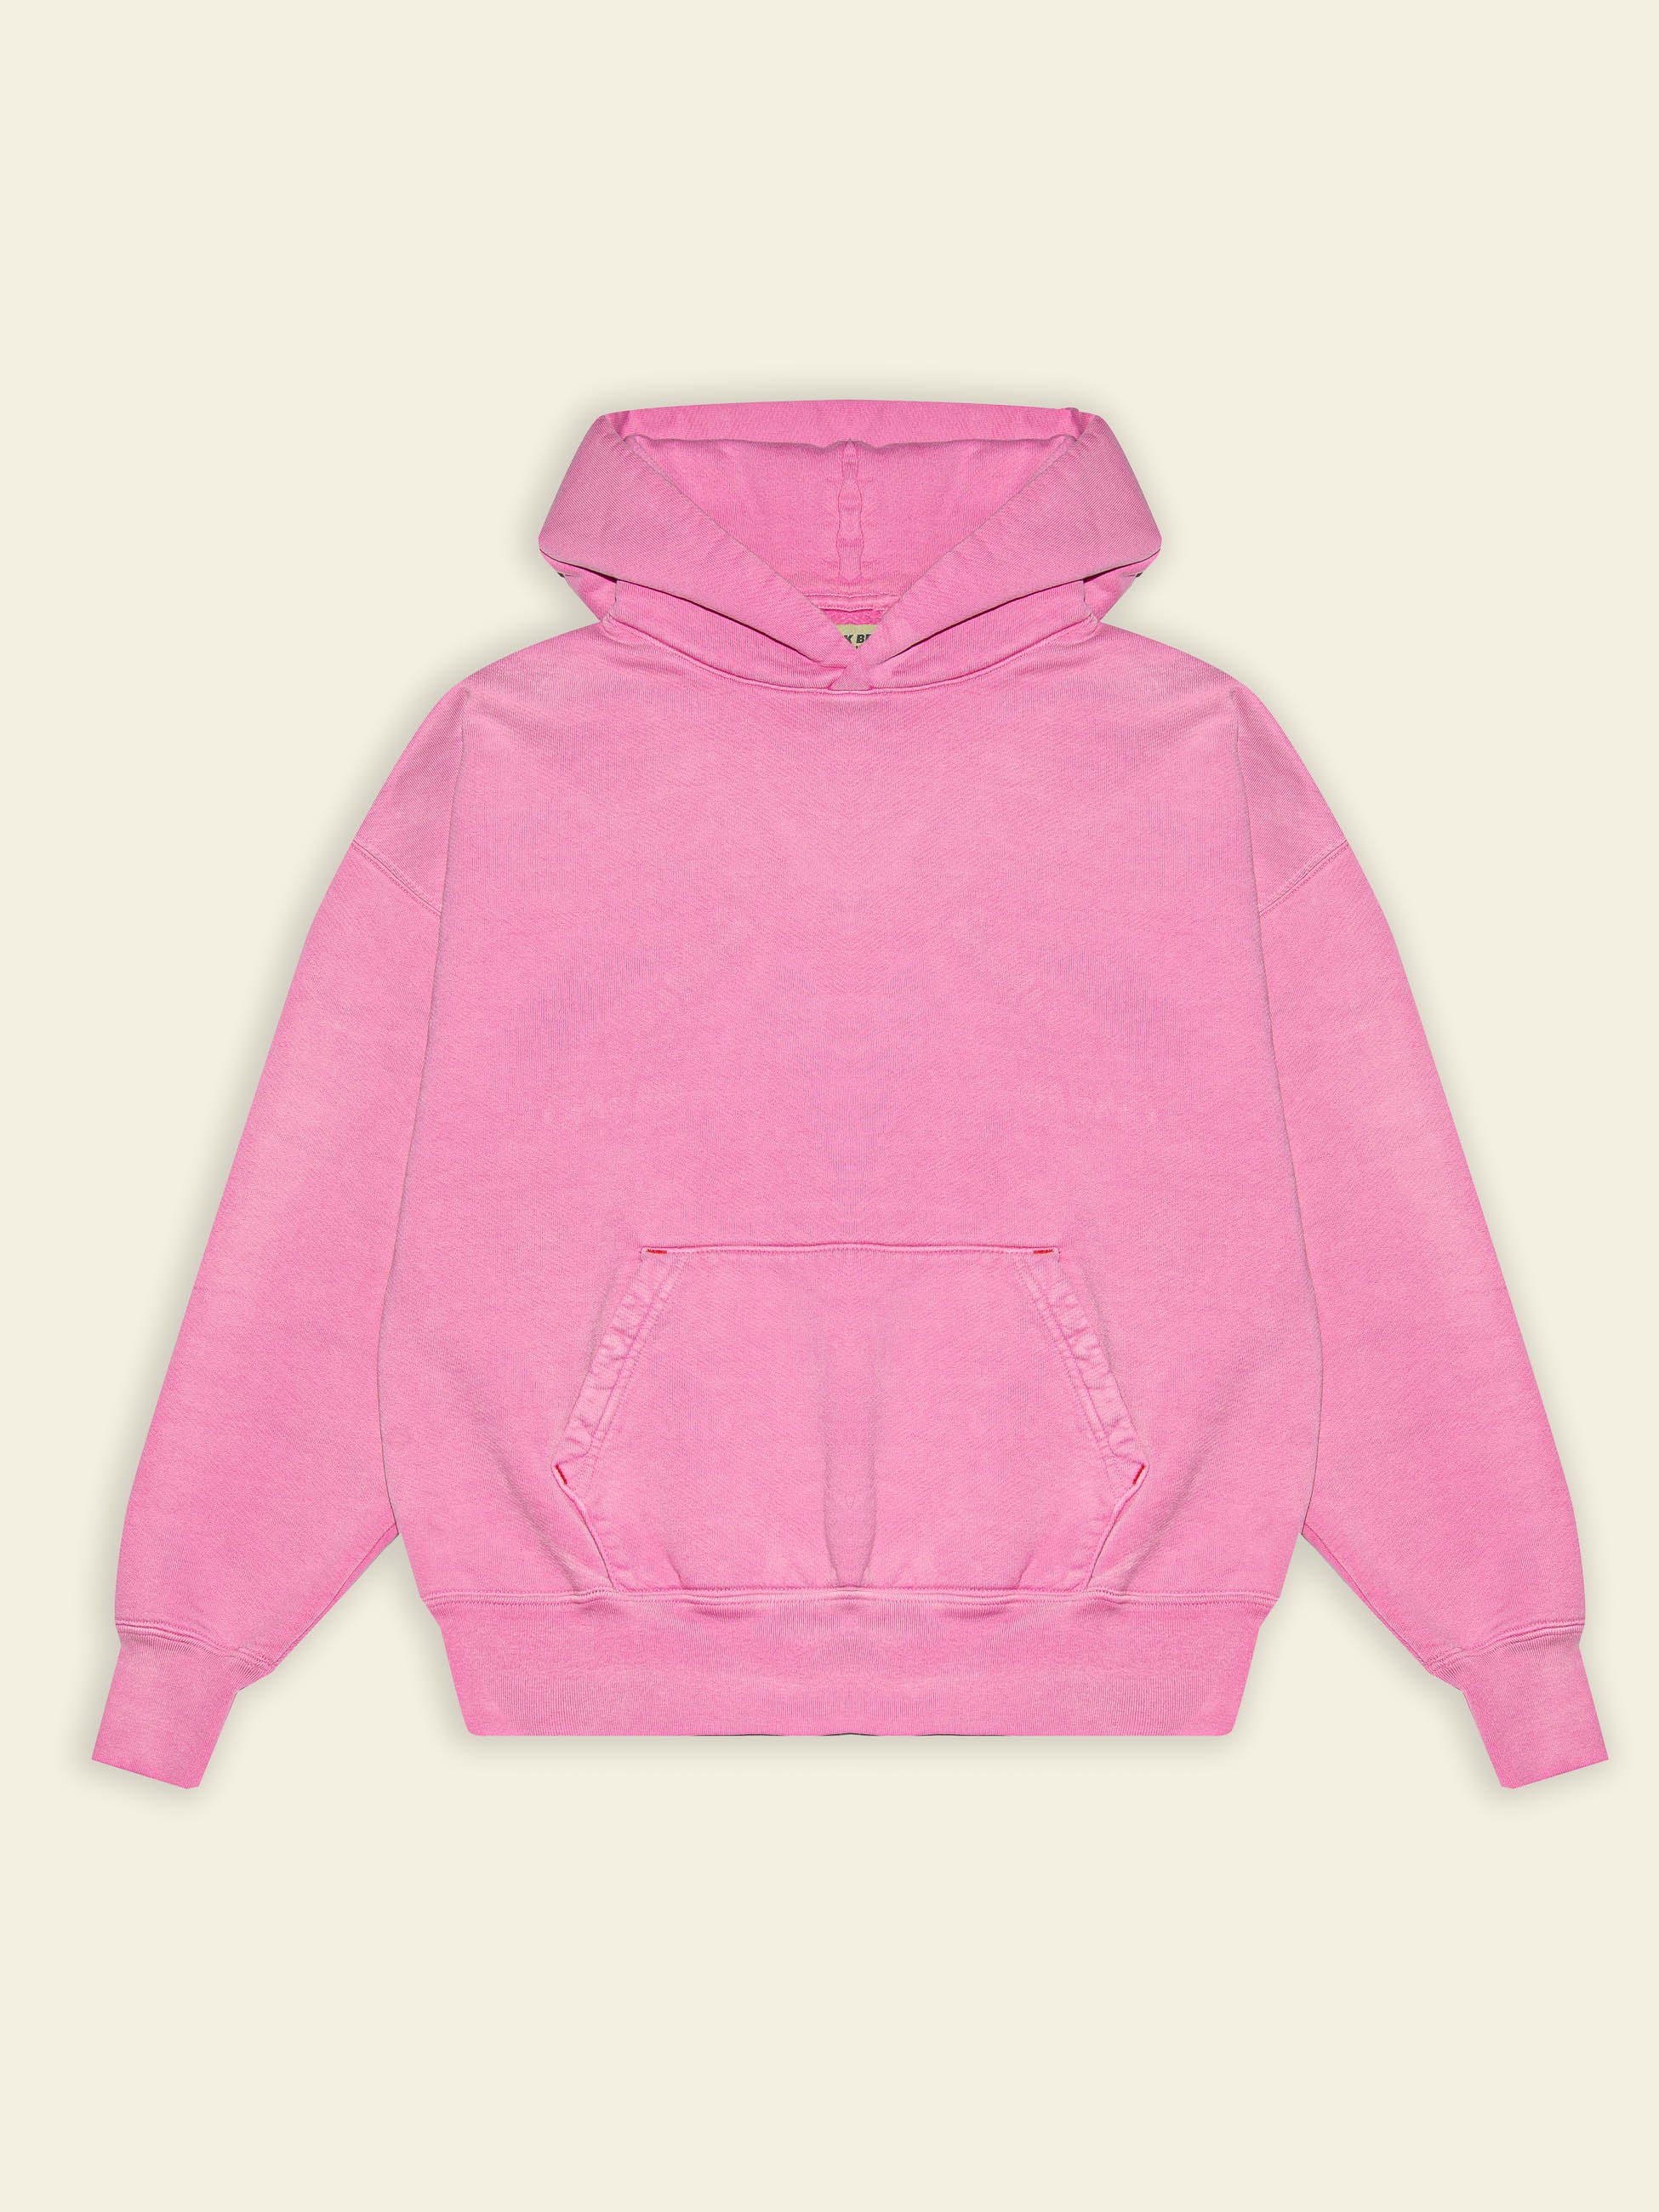 Publik Brand Single Layered Hoodie Hollywood Cerise Pink Heavyweight Fleece, all made in USA